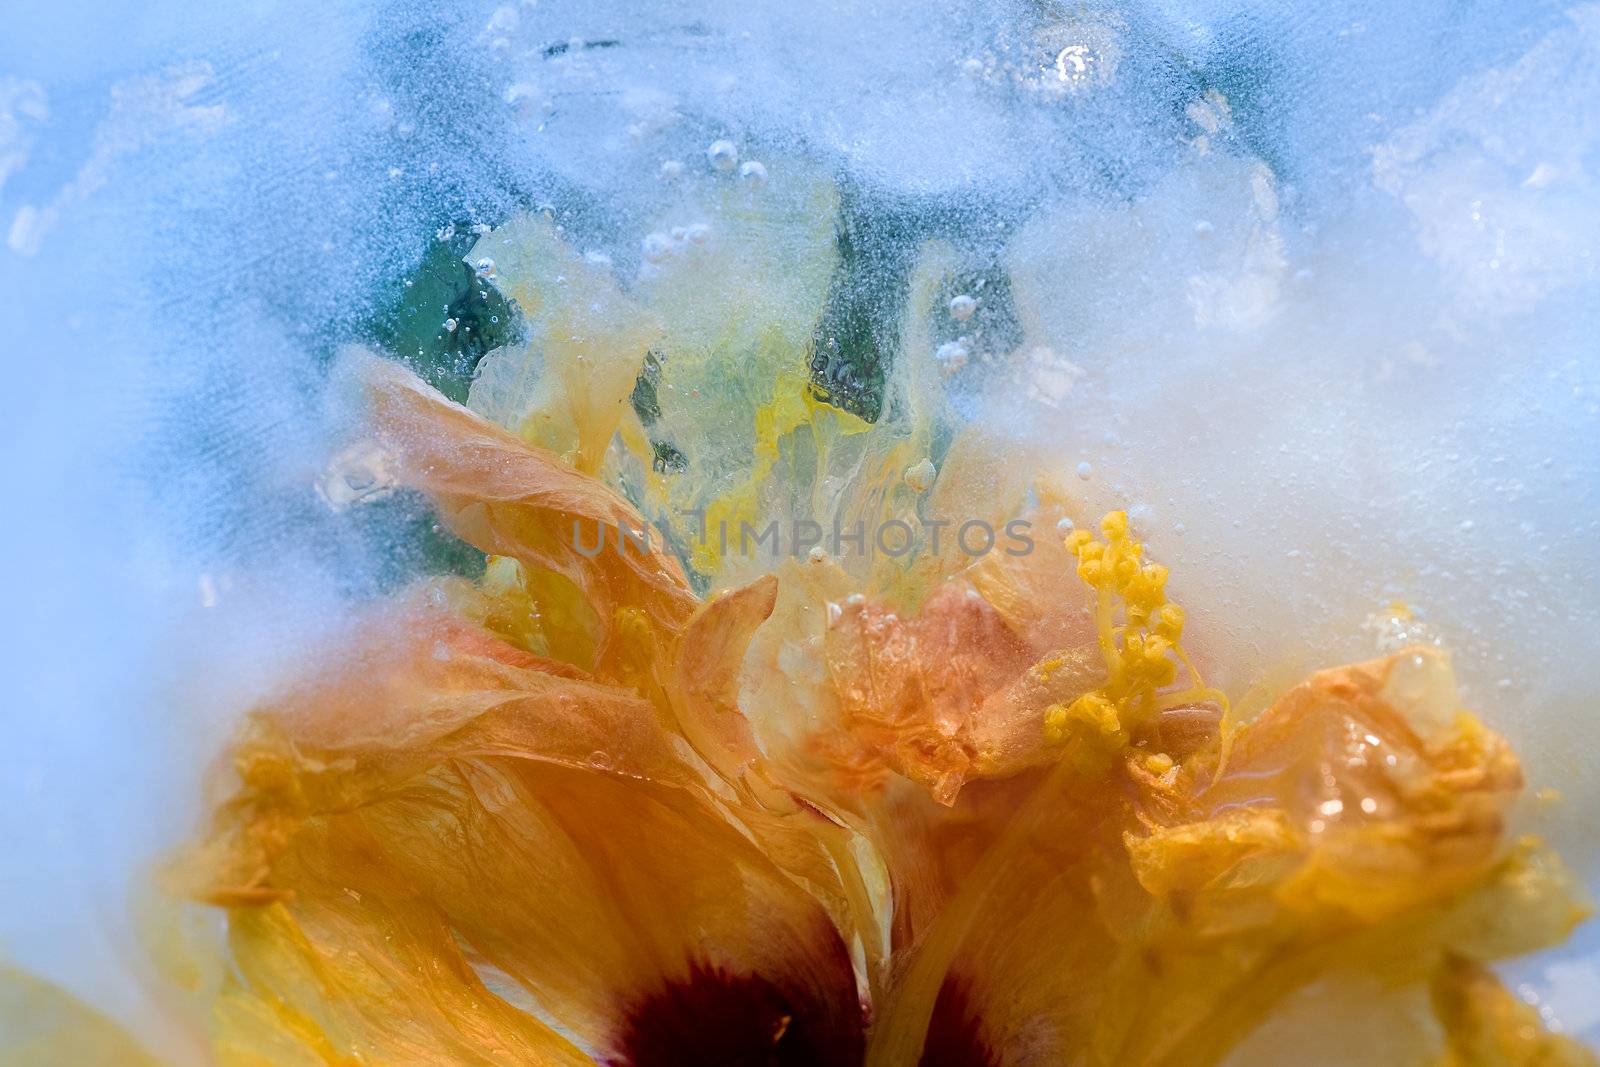  Frozen   hibiscus flower  by foryouinf